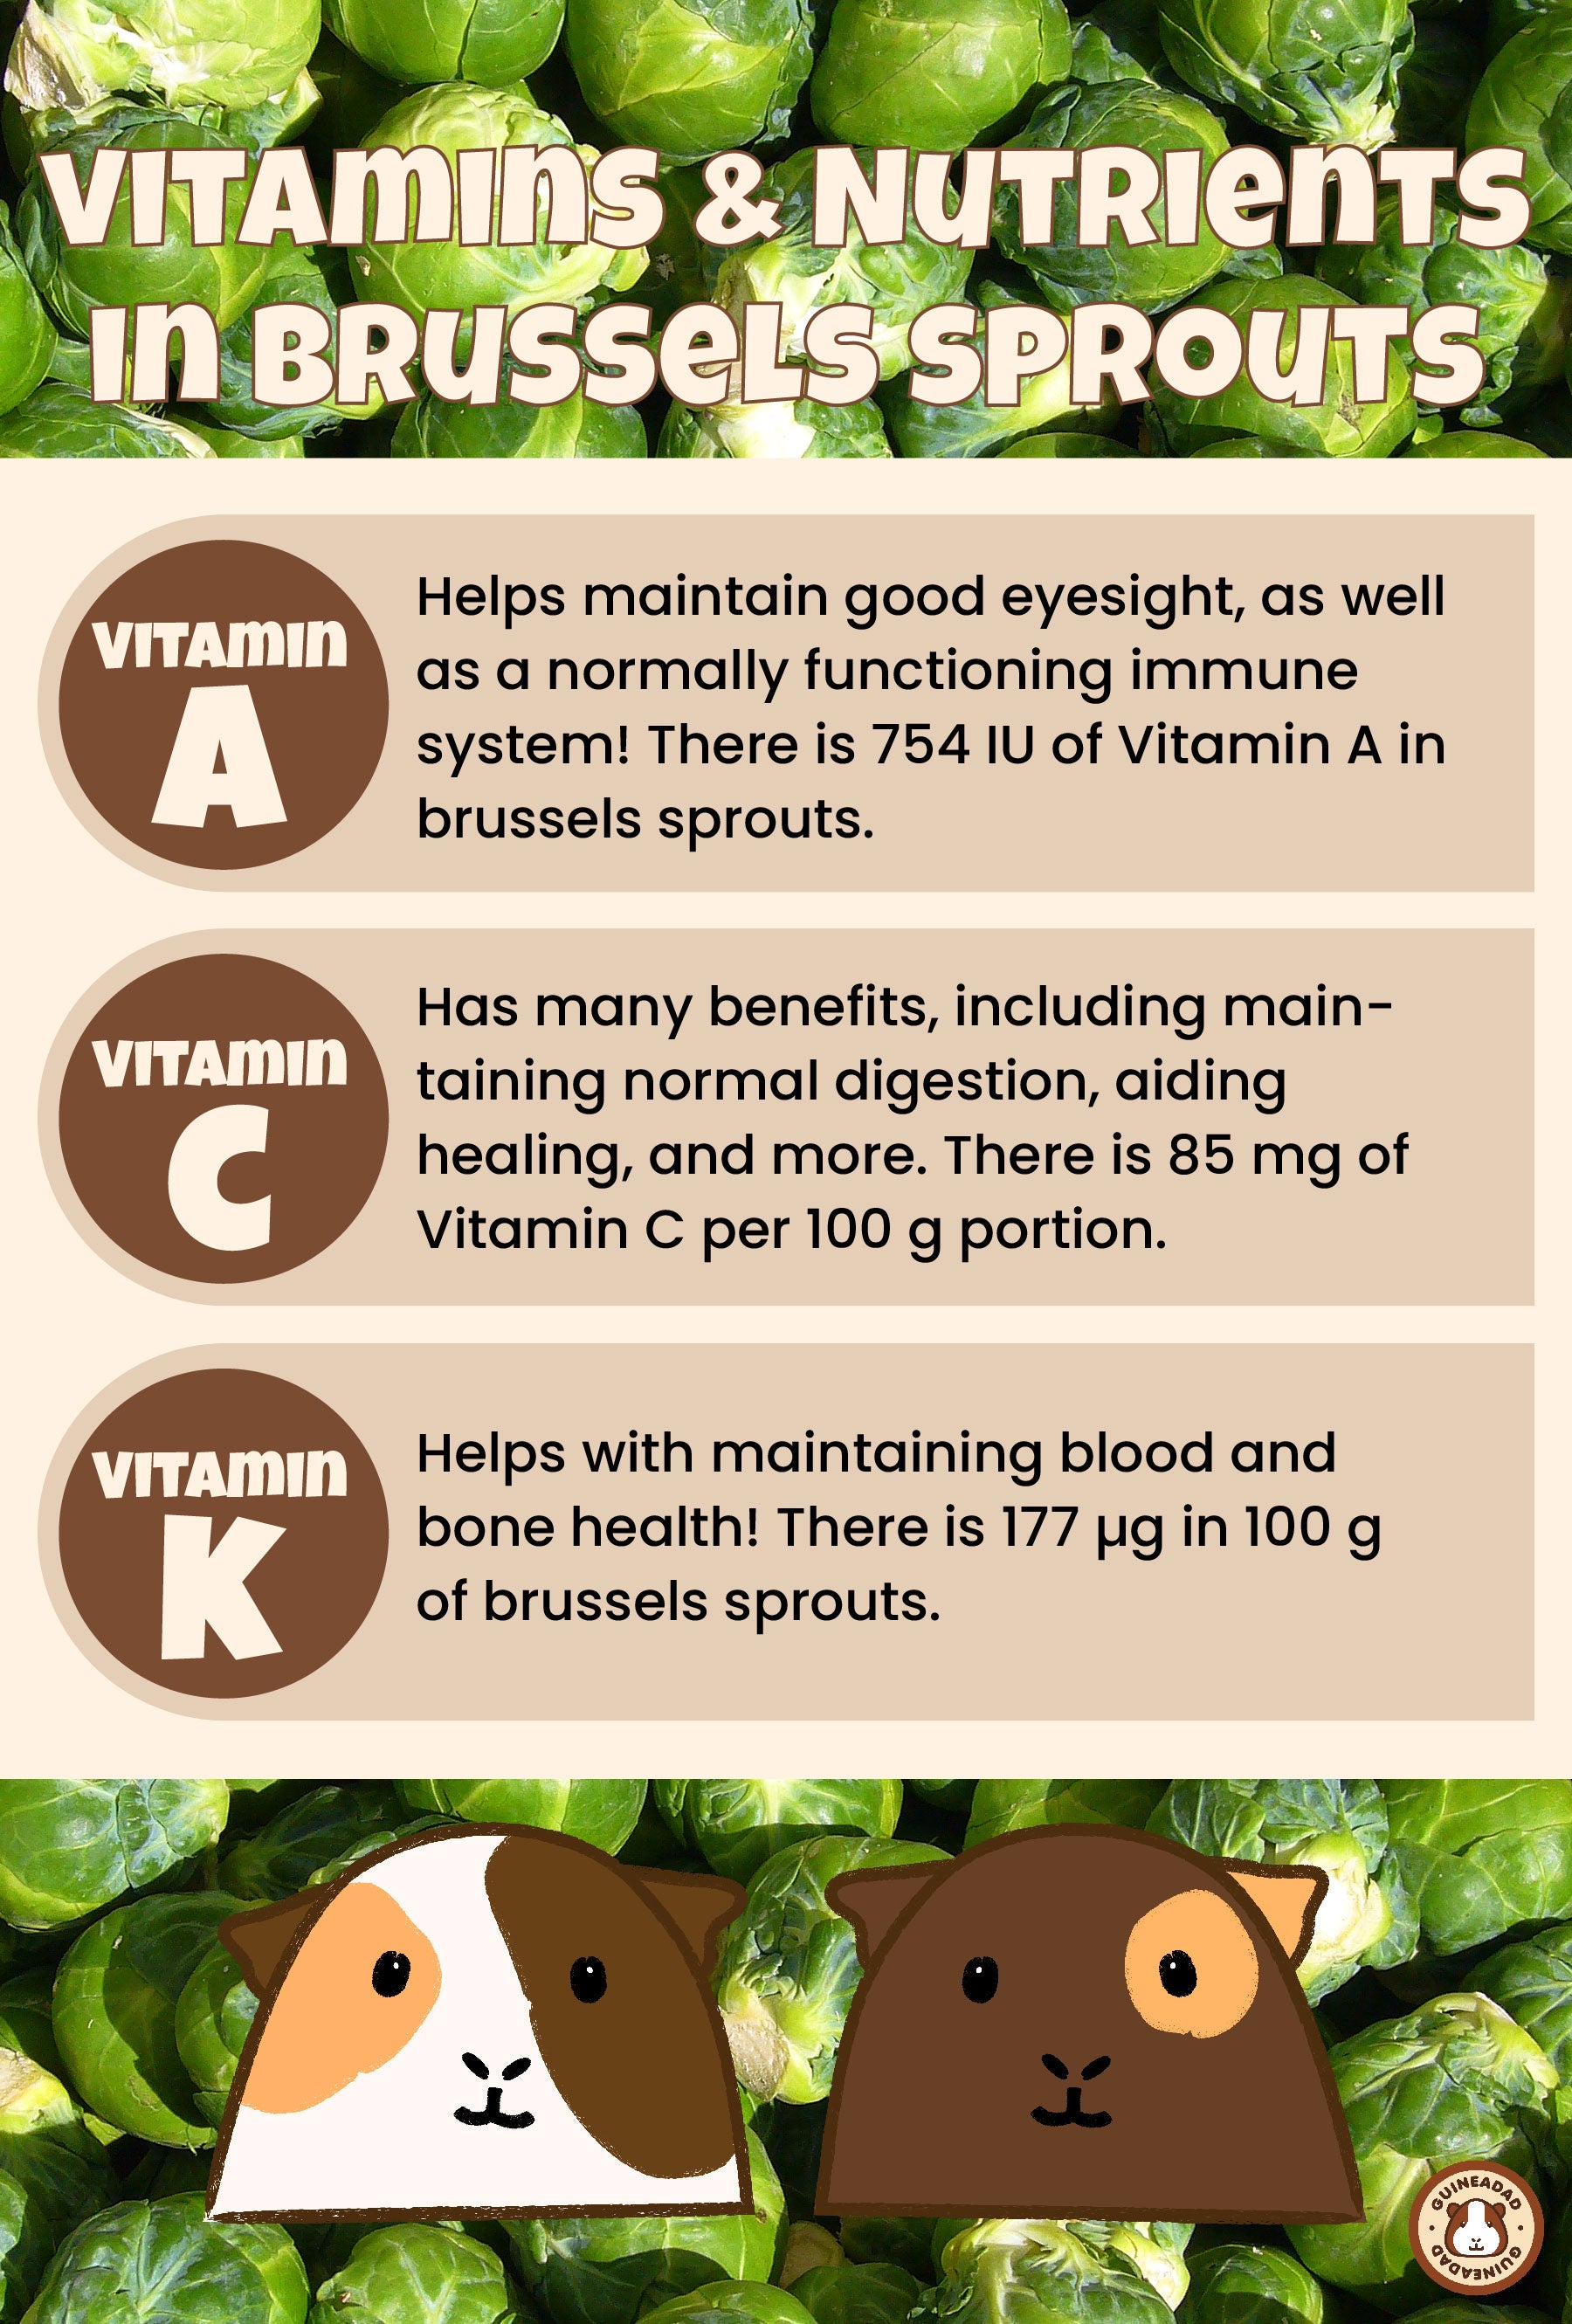 Infographic displaying the vitamins and nutrients in brussels sprouts for guinea pigs